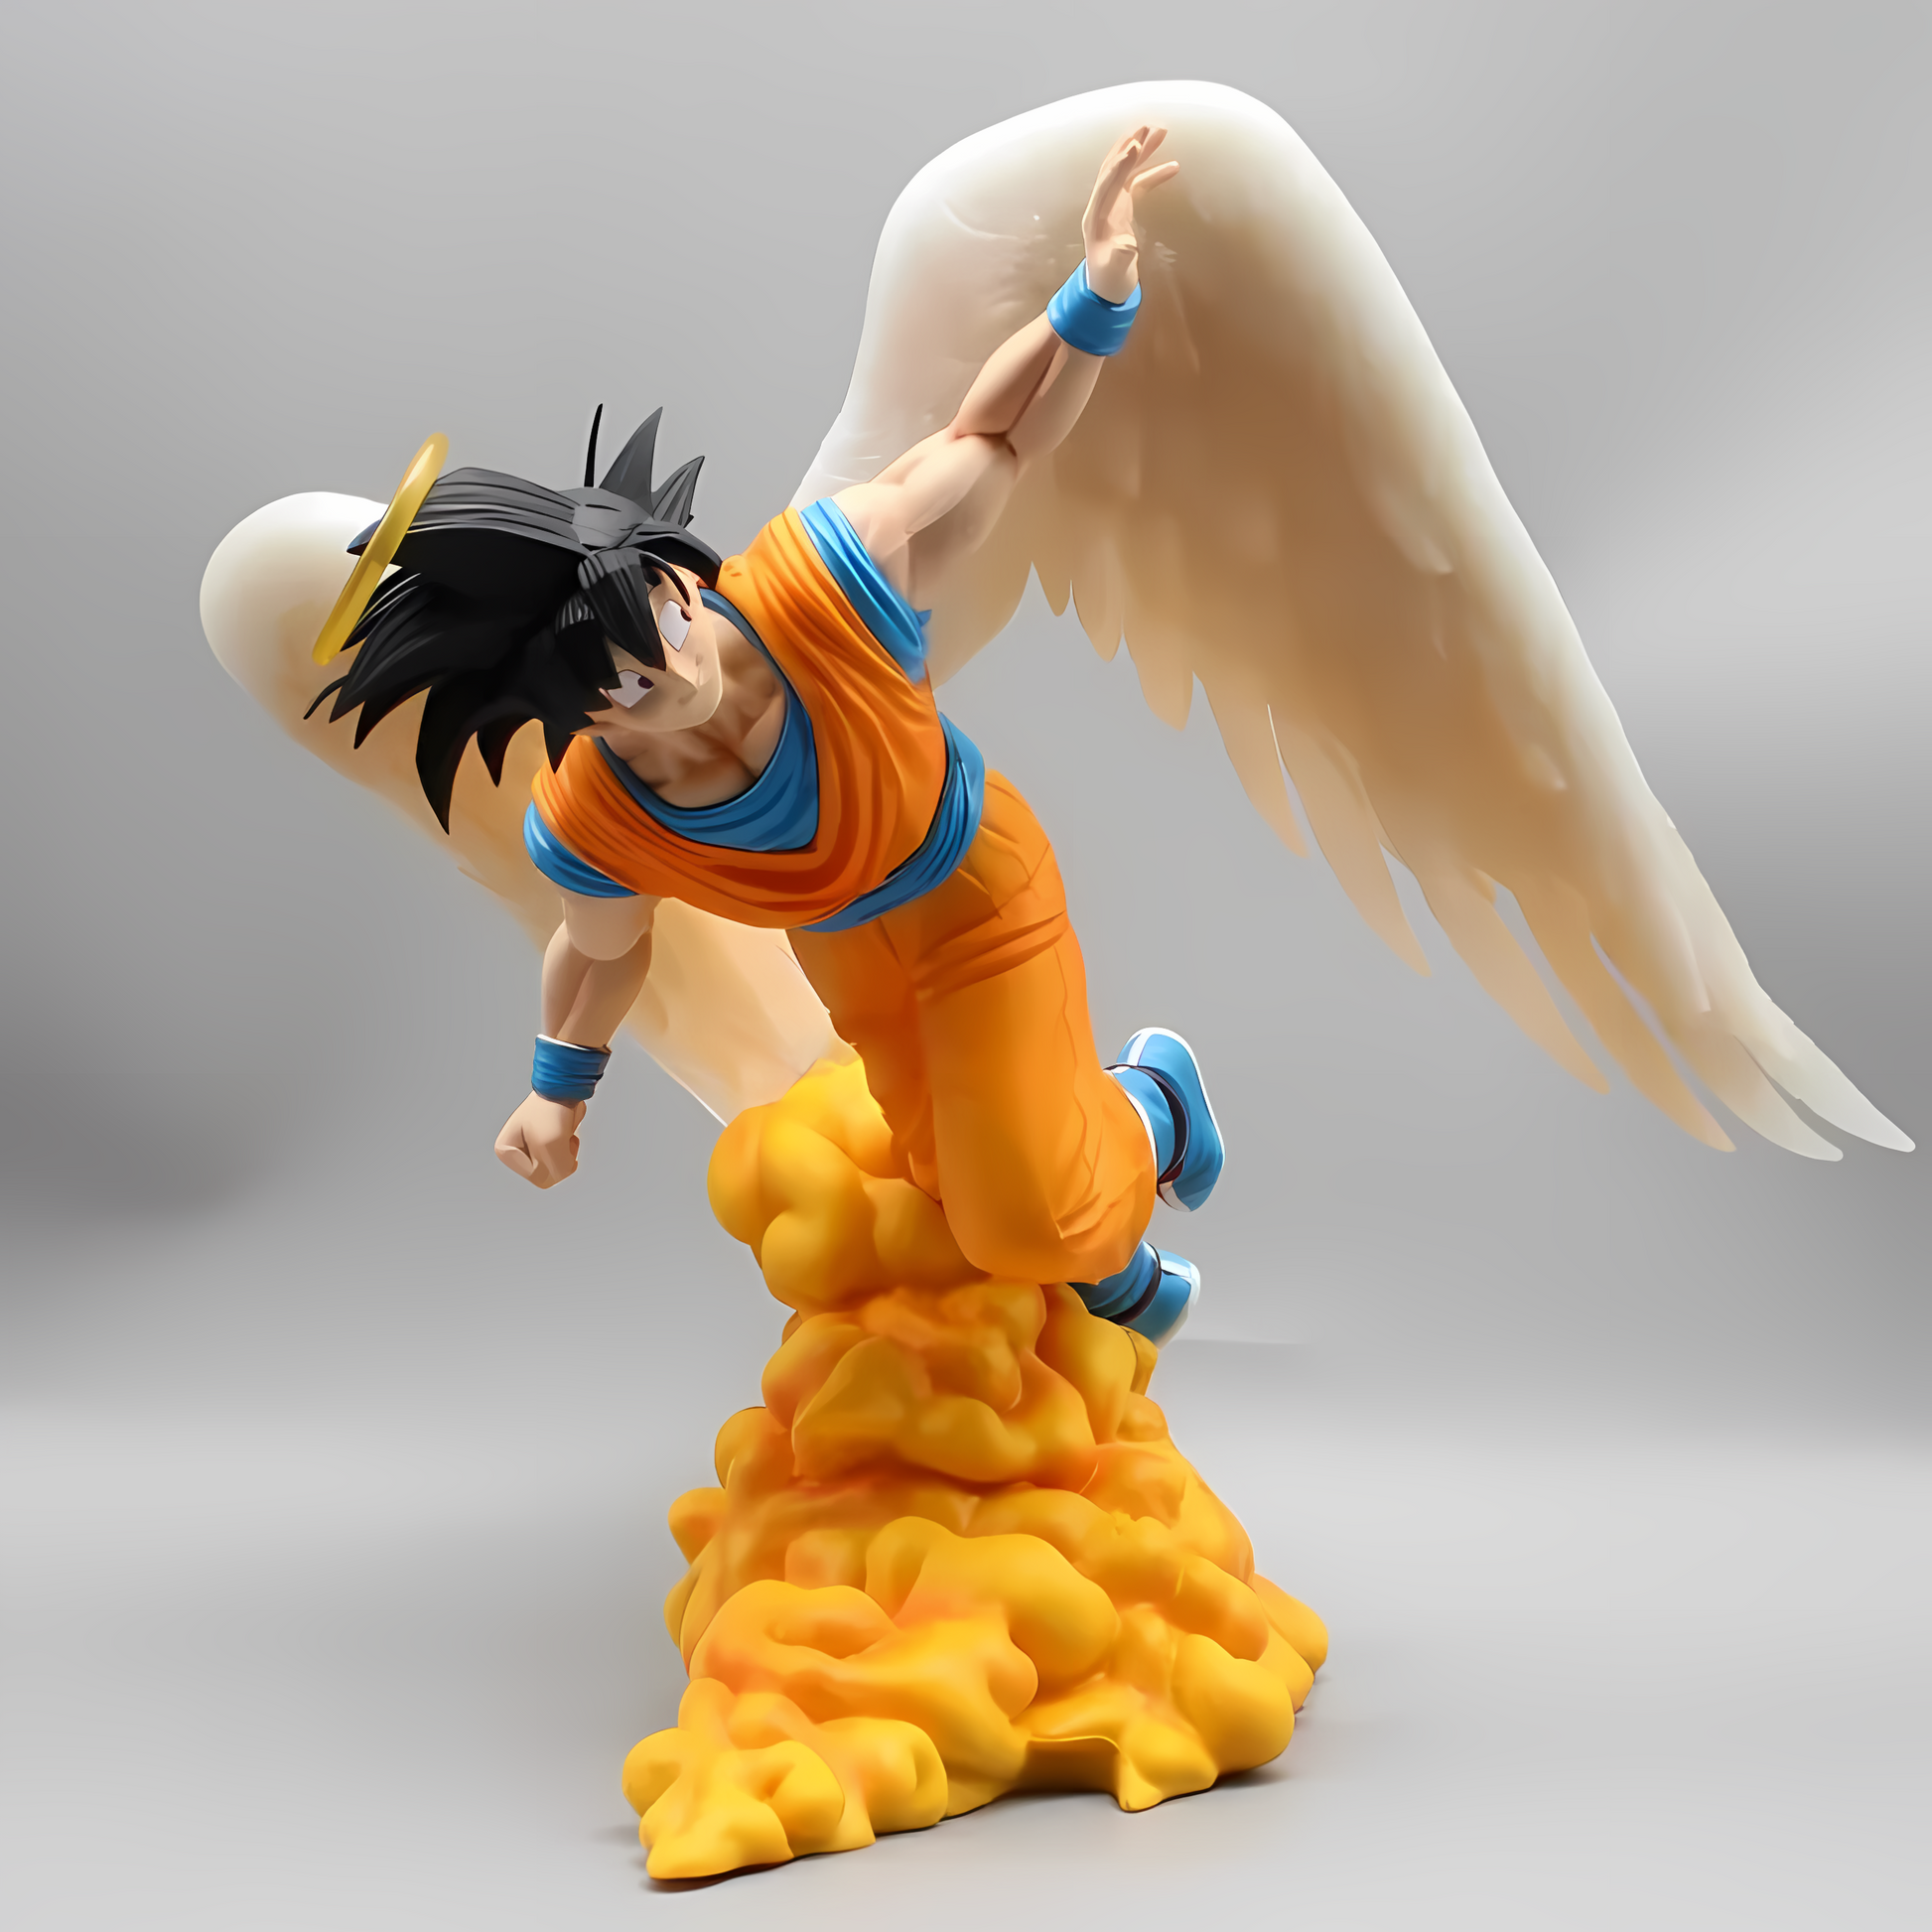 In the 'Raising from Heaven Goku' figure from Dragon Ball, Goku is captured in an ascent, with his head turned skyward and one hand reaching towards the heavens. The figure features Goku with large angelic wings spread wide, kneeled on a fluffy, cloud-like base, wearing his trademark orange gi, creating an inspiring image of hope and ascension.